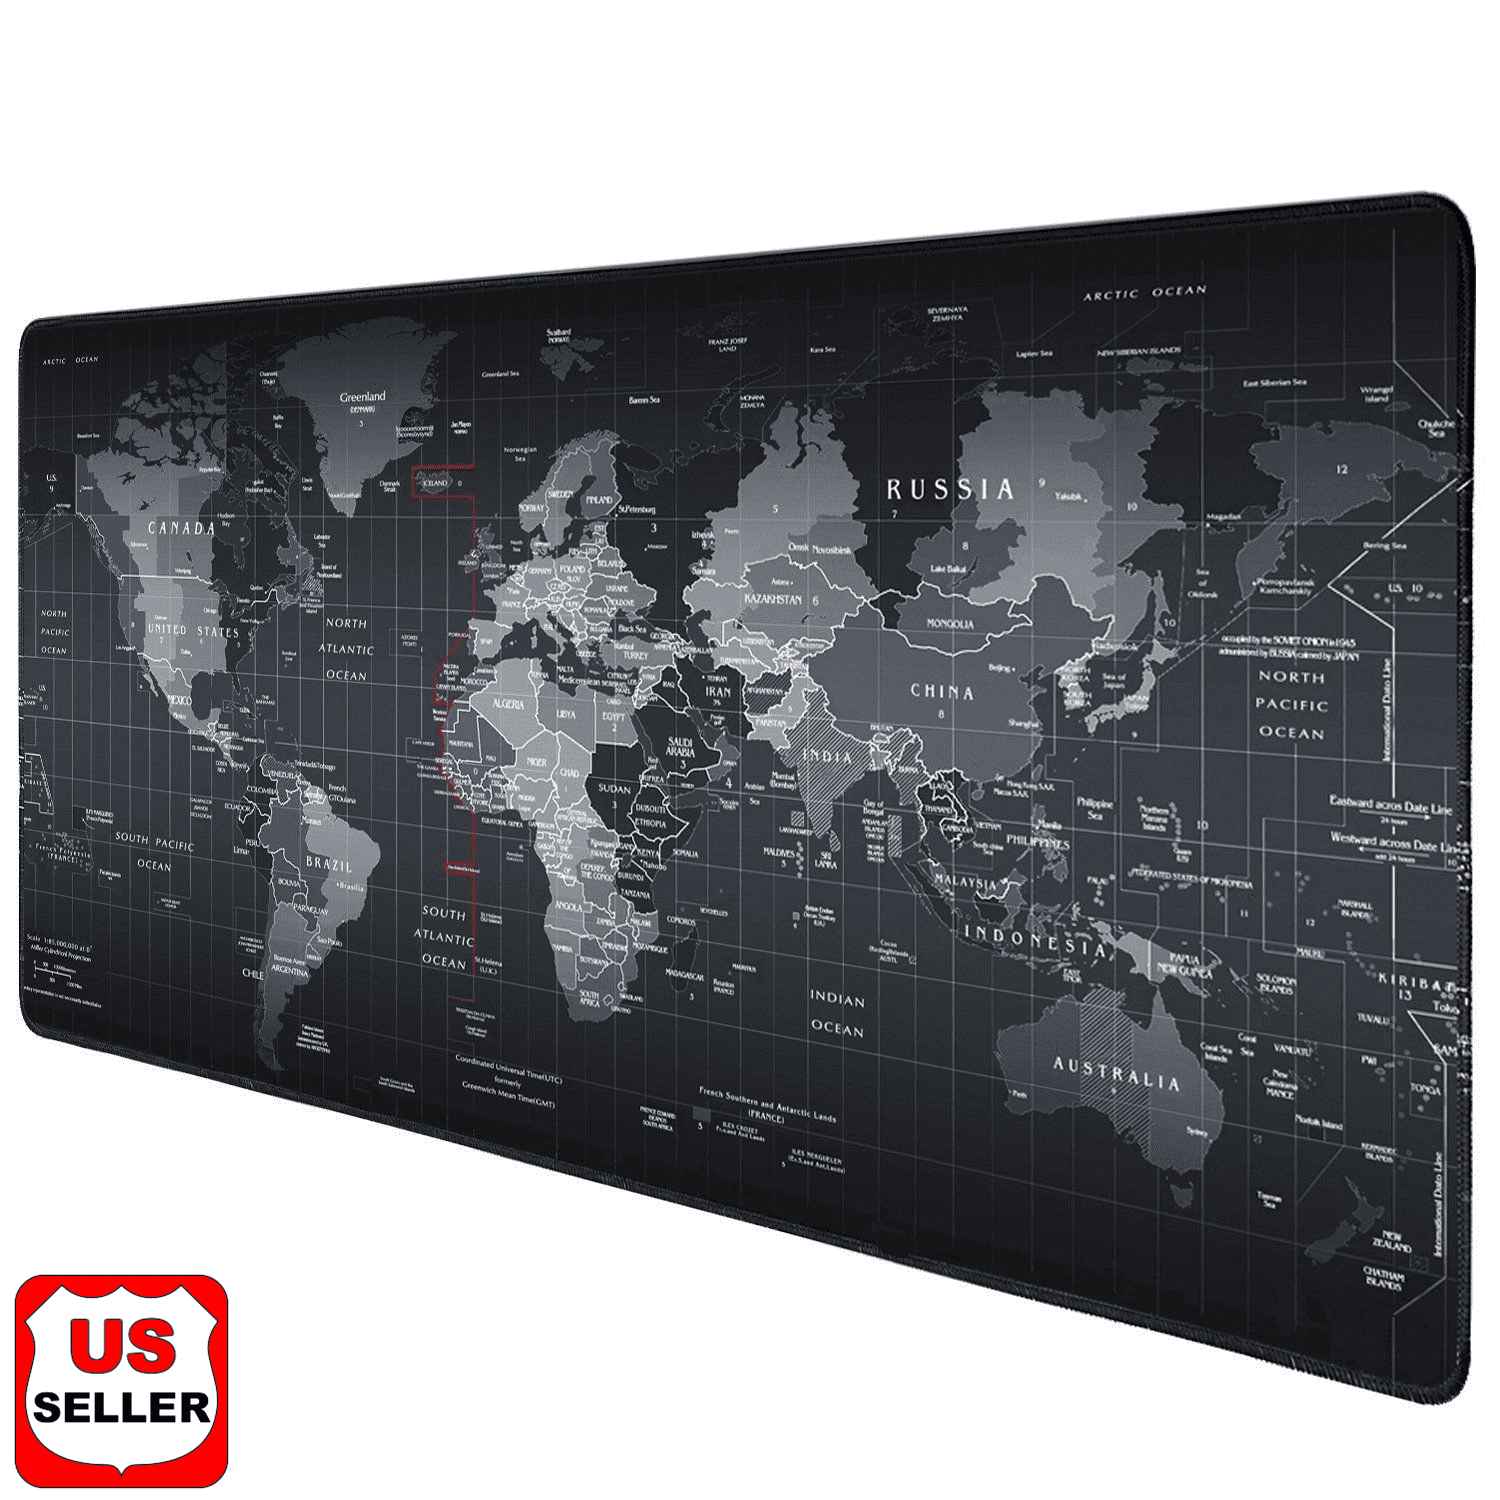 Large Rubber Marble Grain Keyboard Laptop Cushion Mouse Pad Computer Desk Mat